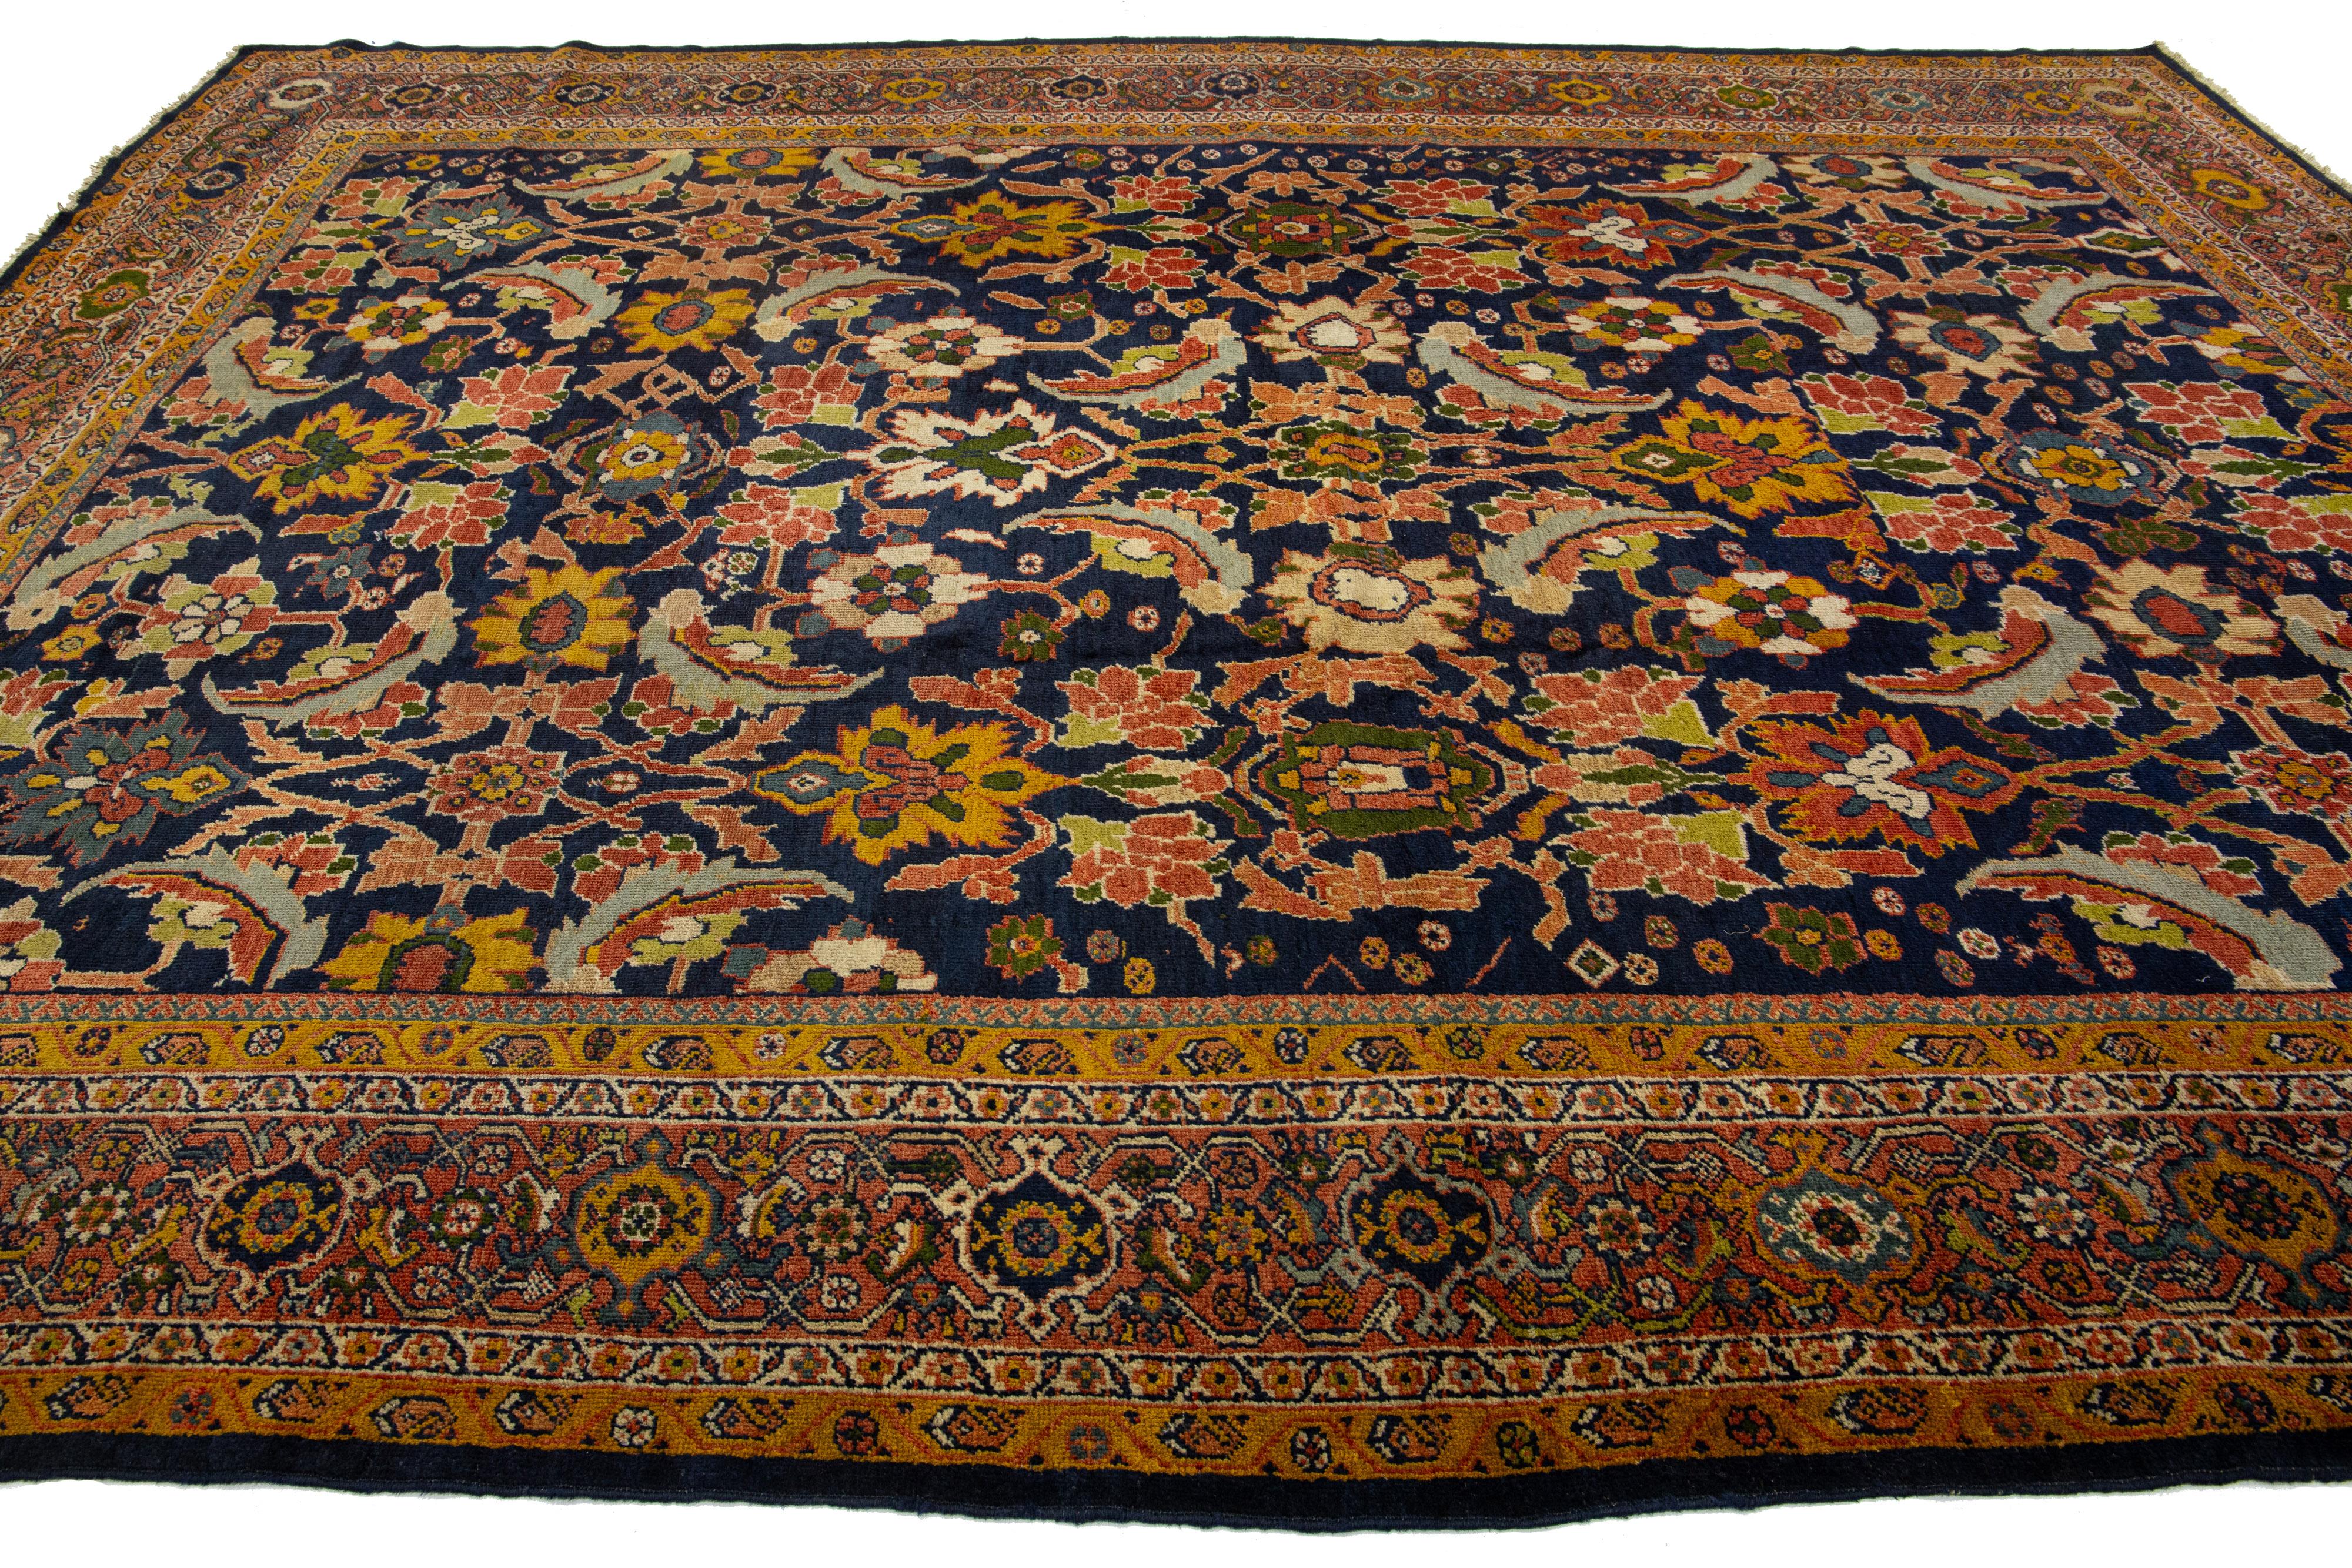 19th Century Blue Antique Persian Sultanabad Wool Rug From the 1880s With Floral Motif For Sale